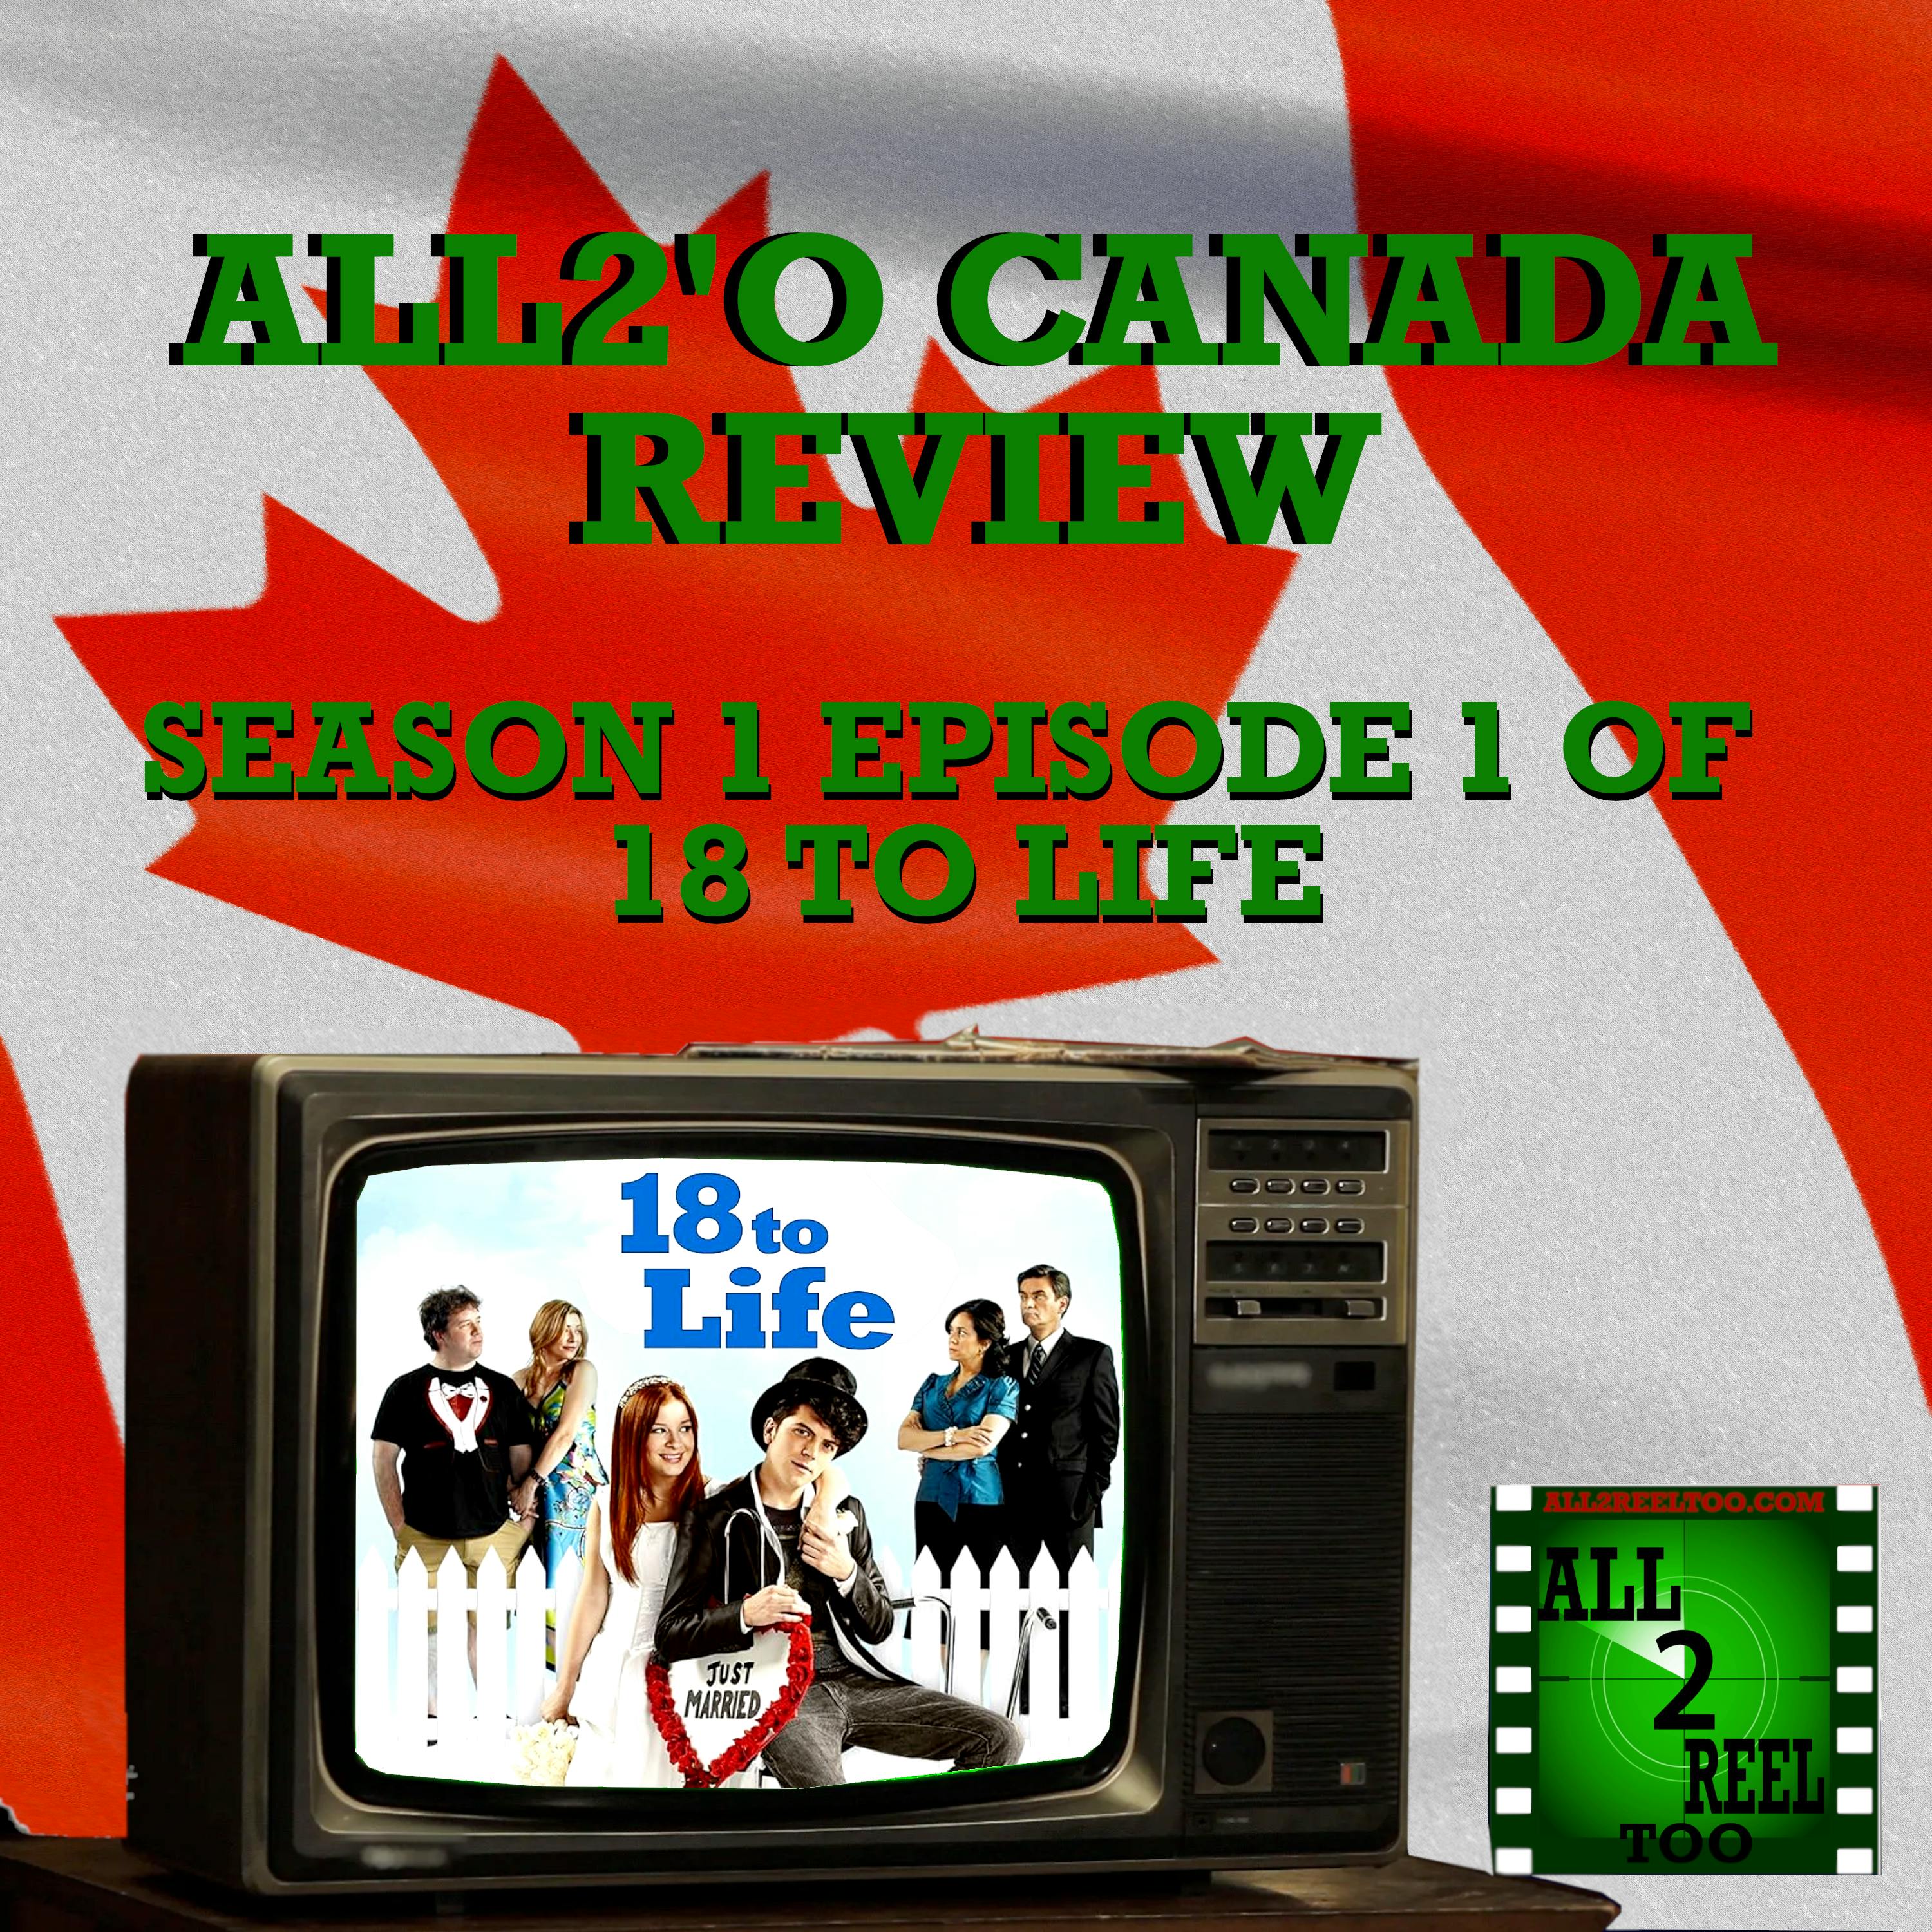 18 to Life (2010) S1EP1- All2'O CANADA Review